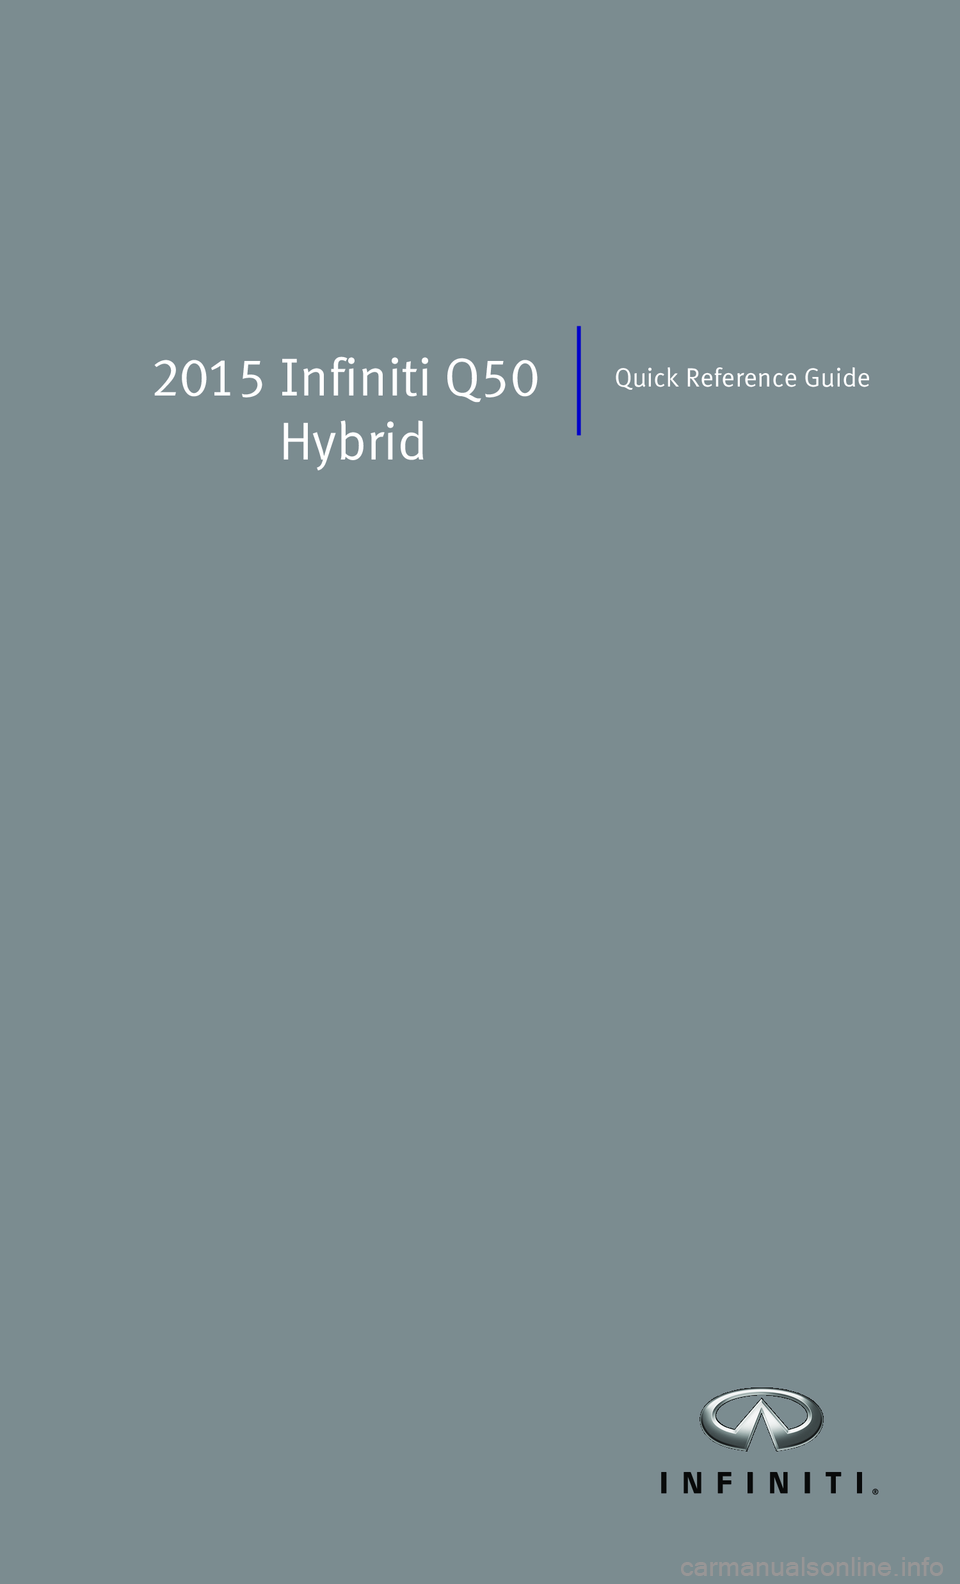 INFINITI Q50 HYBRID 2015  Quick Reference Guide 2015  Infiniti Q50 
Hybrid
Quick Reference Guide 